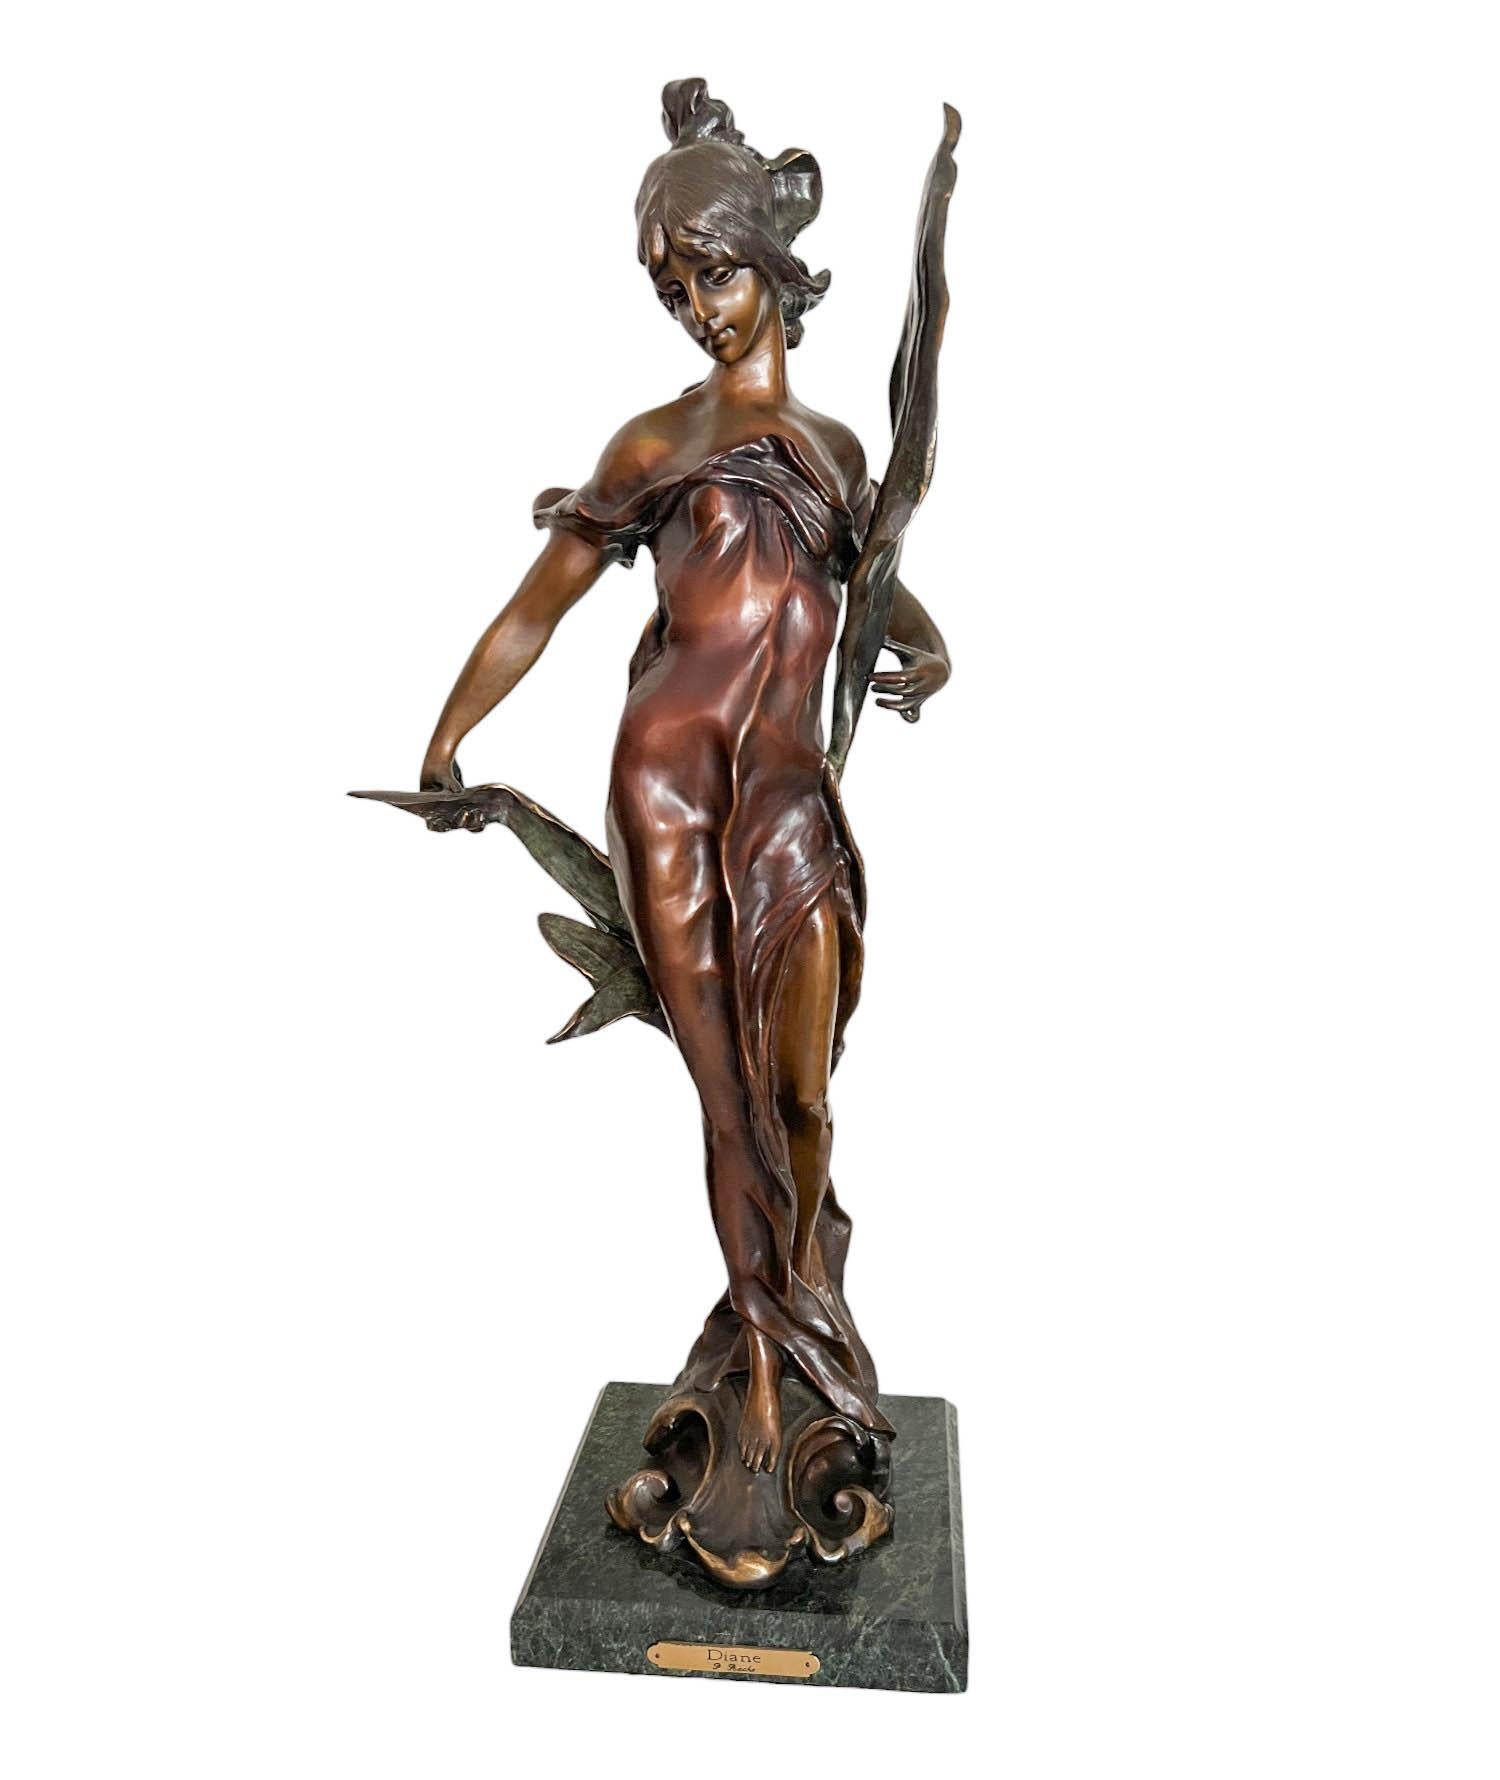 A bronze cast of Diana, Goddess of the Hunt, after Pierre Roche (French 1955 - 1922). The sculpture stands on a square green marble base.

Dimensions:

Base: 8